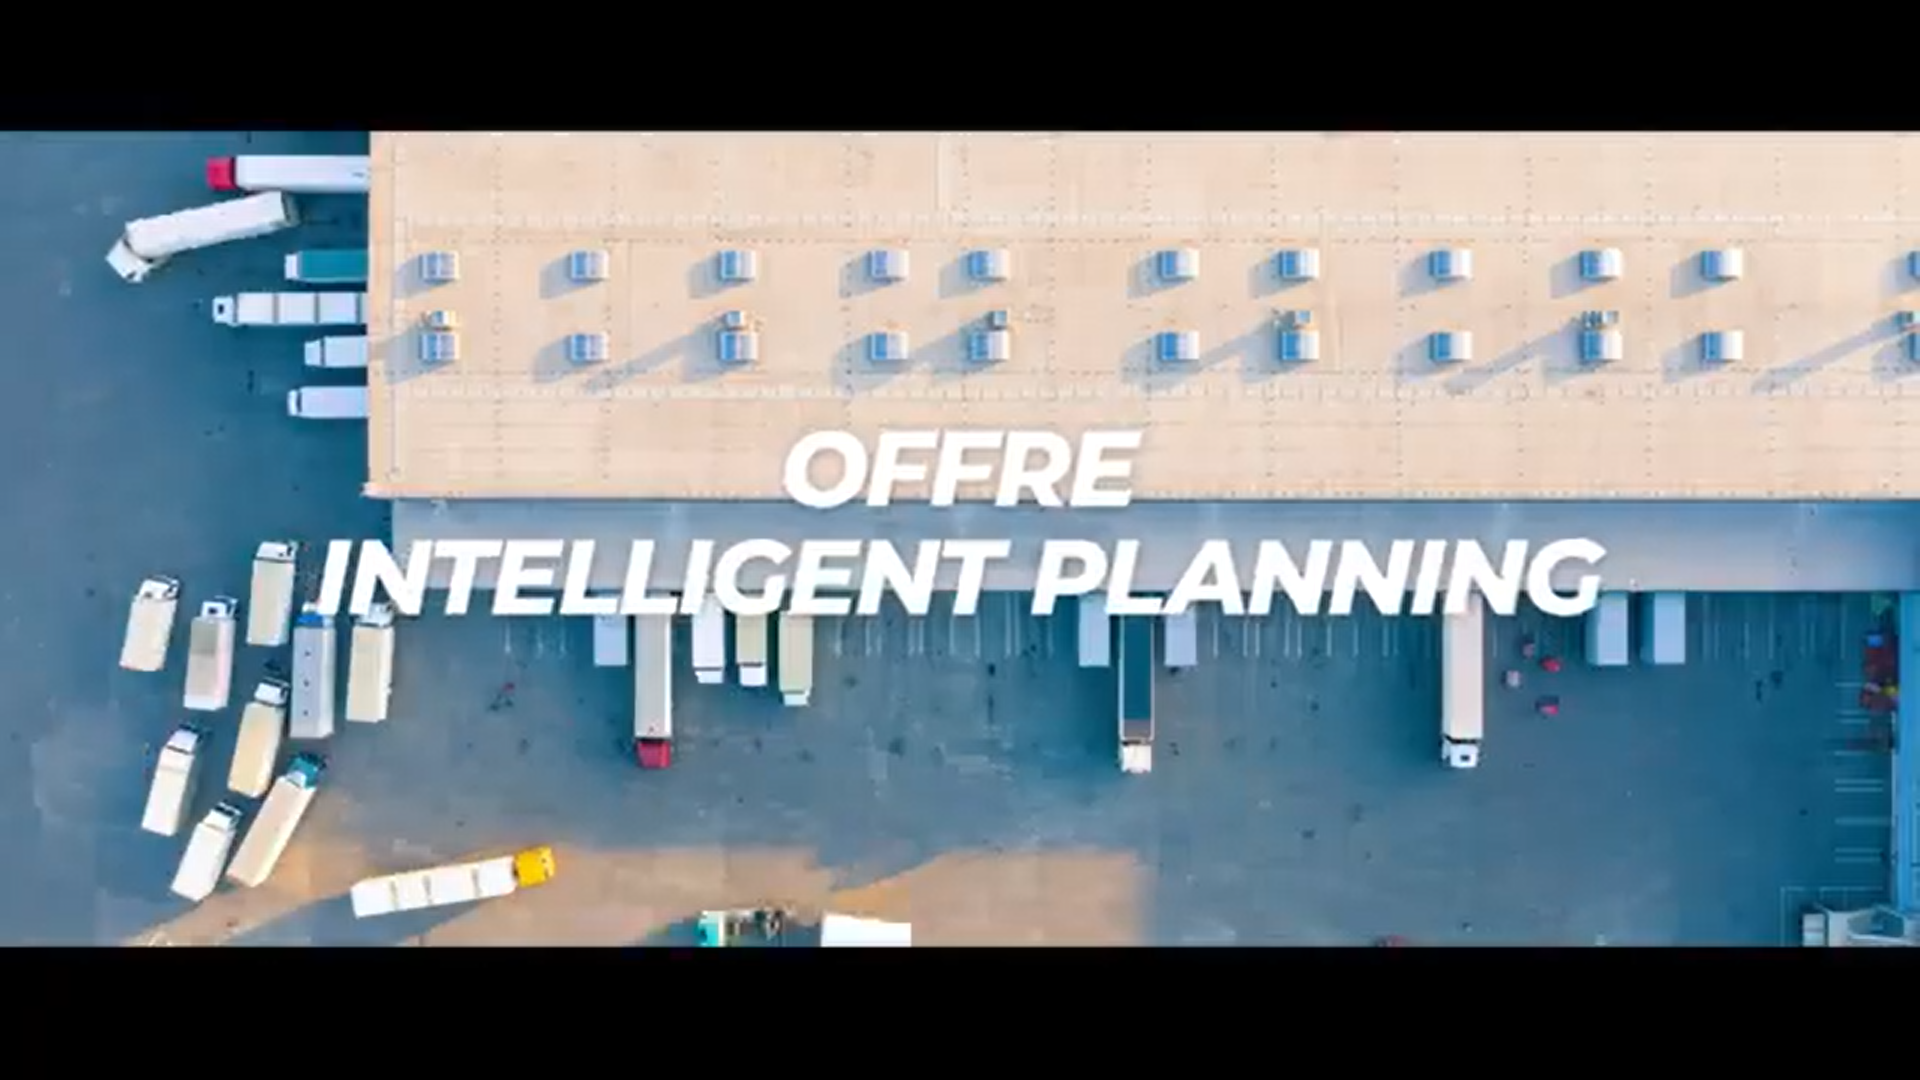 Offre intelligent planning by VISEO